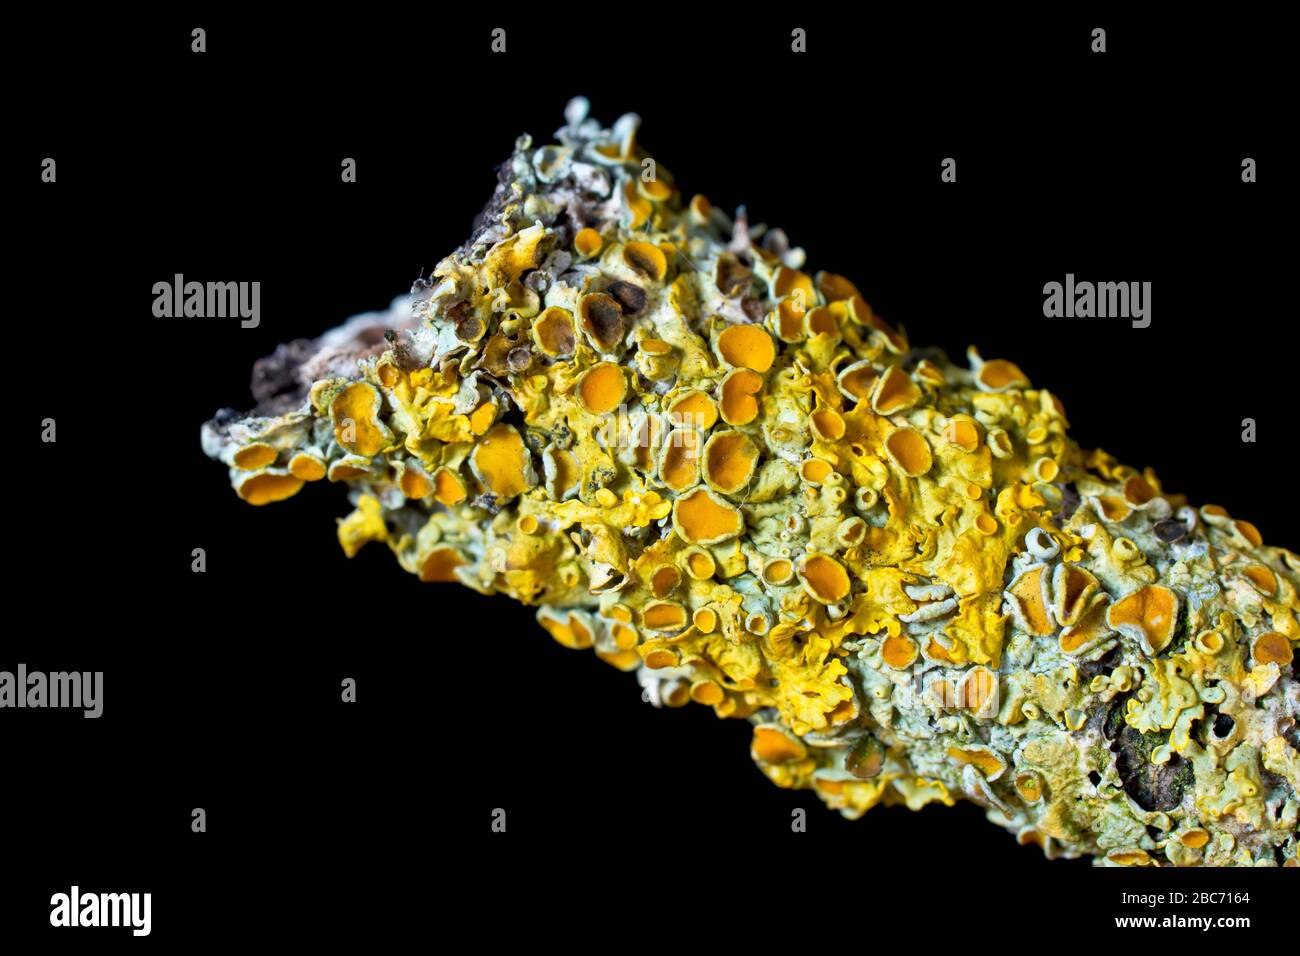 Close up detail of Xanthoria Parietina lichen isolated against a black background. Also known as Maritime Sunburst, Yellow Scale, Shore Lichen. Stock Photo